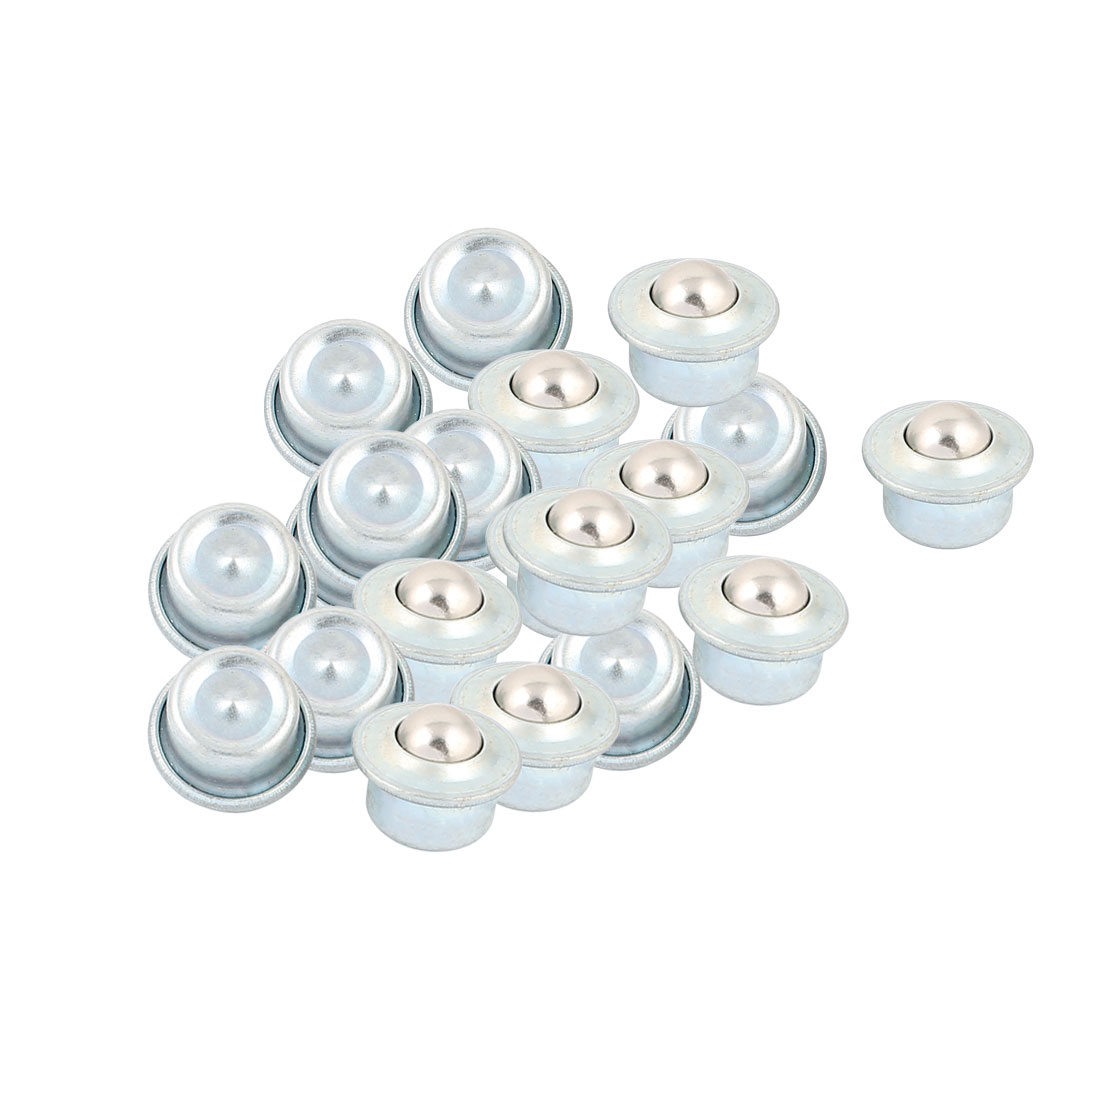 Unique Bargains 20Pcs Flange Fit Fixing Transfer Unit Mounted Ball Bearings Silver Tone